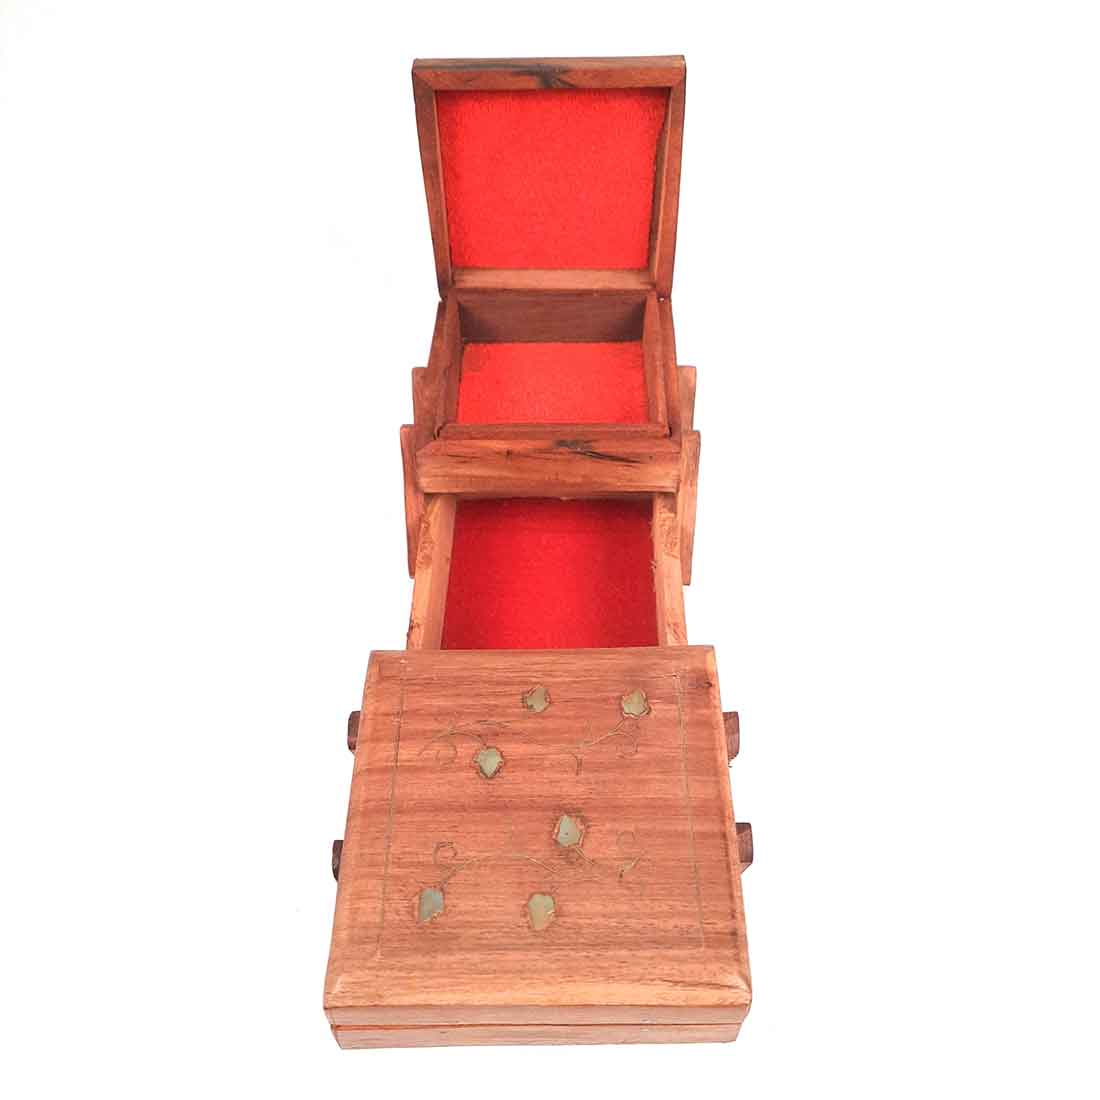 Wooden Jewellery Box Organizer | Multi-Purpose Folding Jewelry Boxes | 3 Tier Jewelry Box  - for Earrings, Necklace, Rings, Makeup, Dressing Table Decor & Gifts - 8 Inch